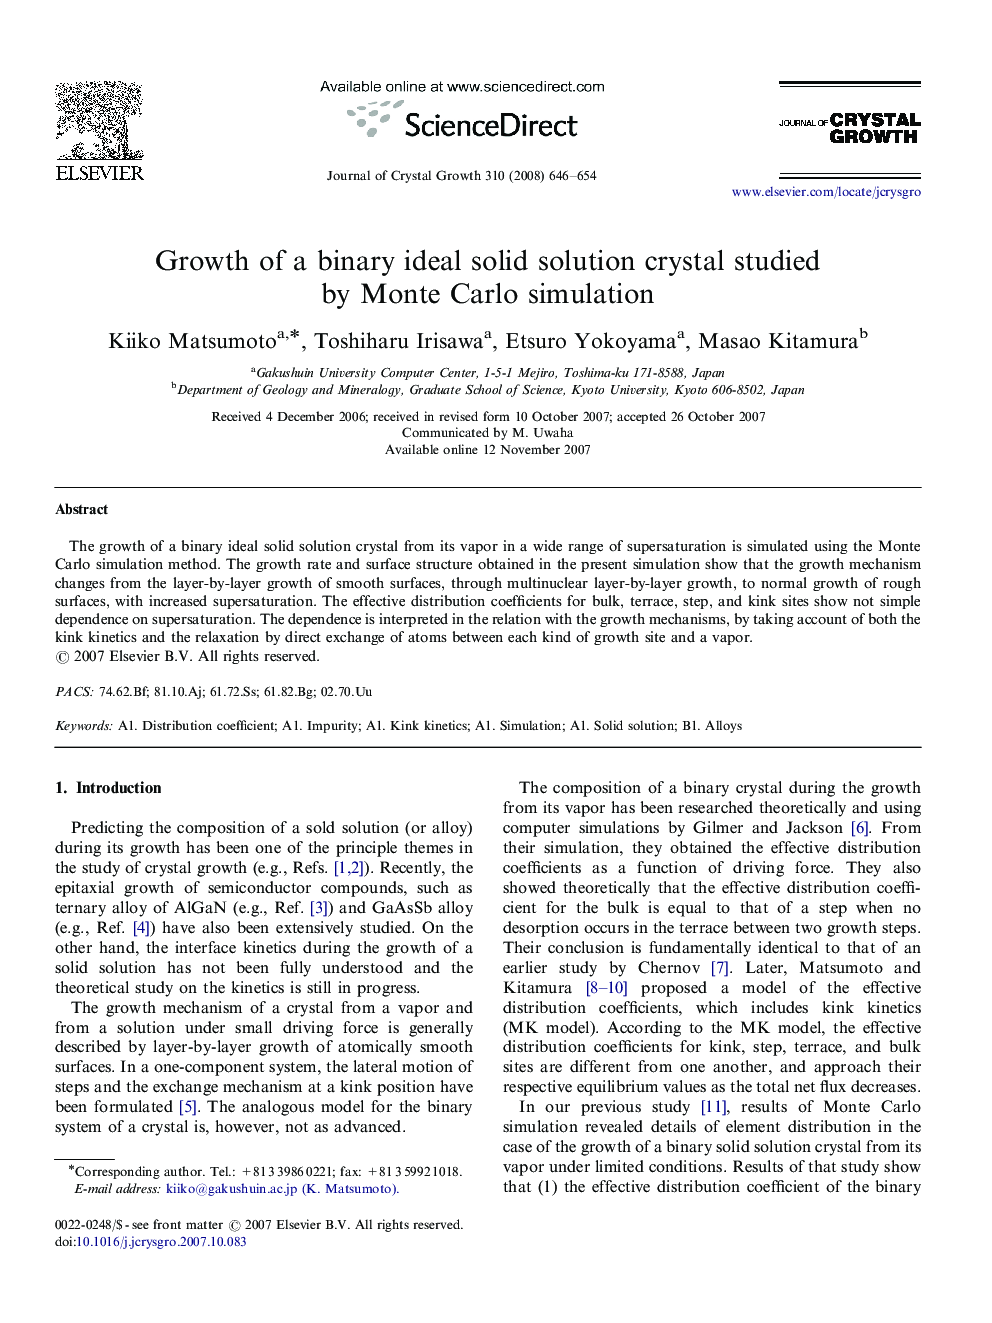 Growth of a binary ideal solid solution crystal studied by Monte Carlo simulation